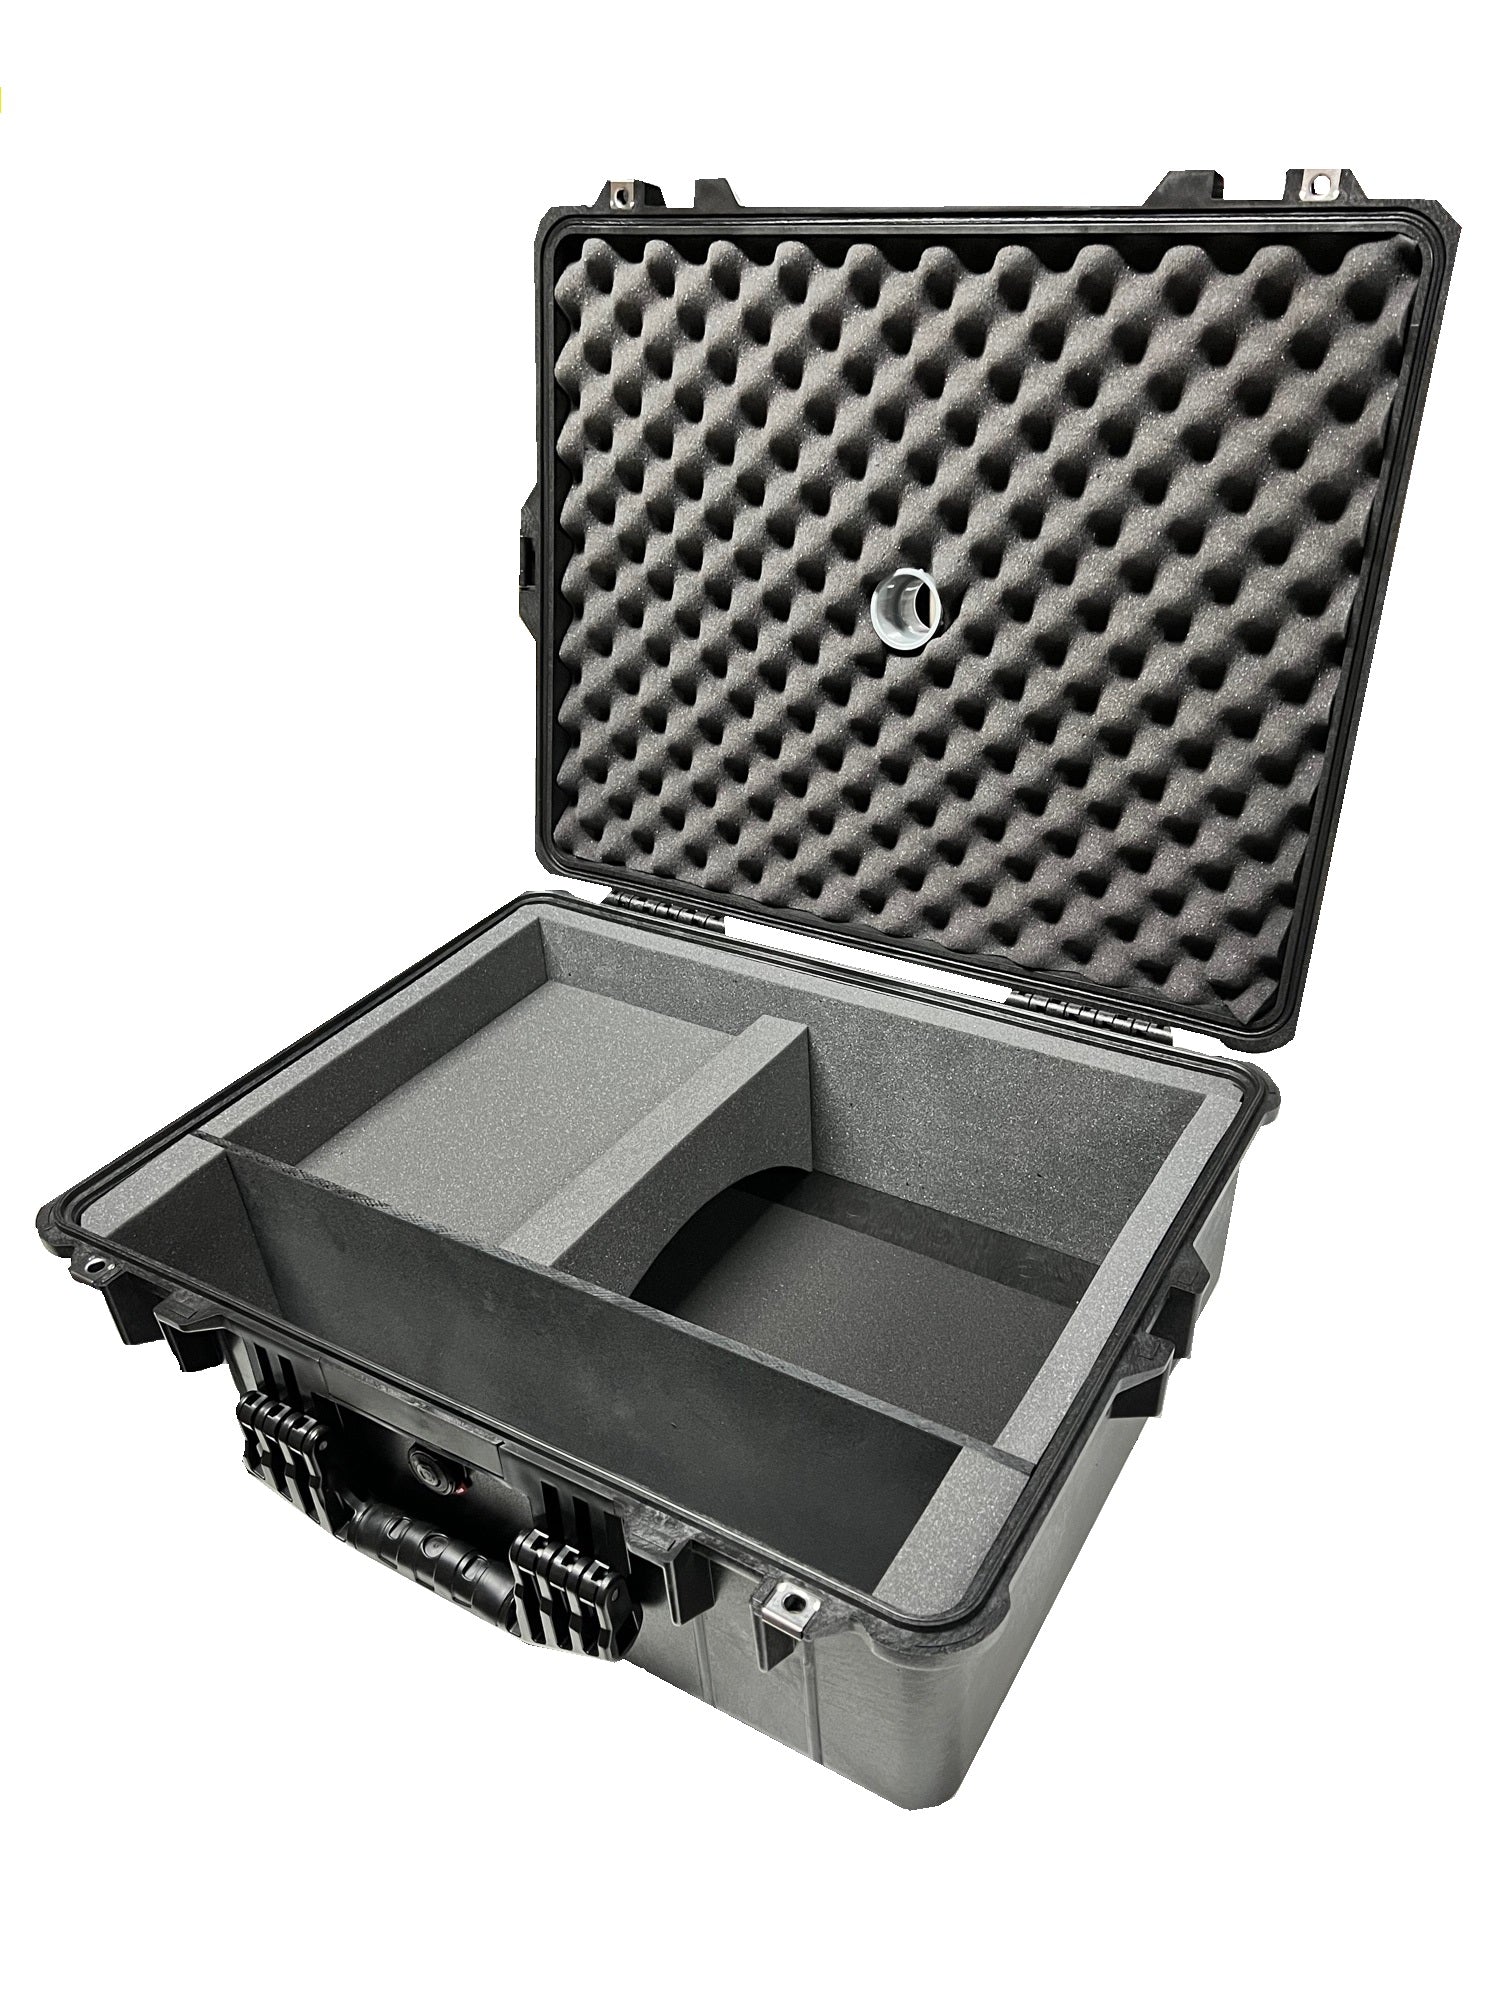 Starlink Storage Case for Standard Actuated Dishes